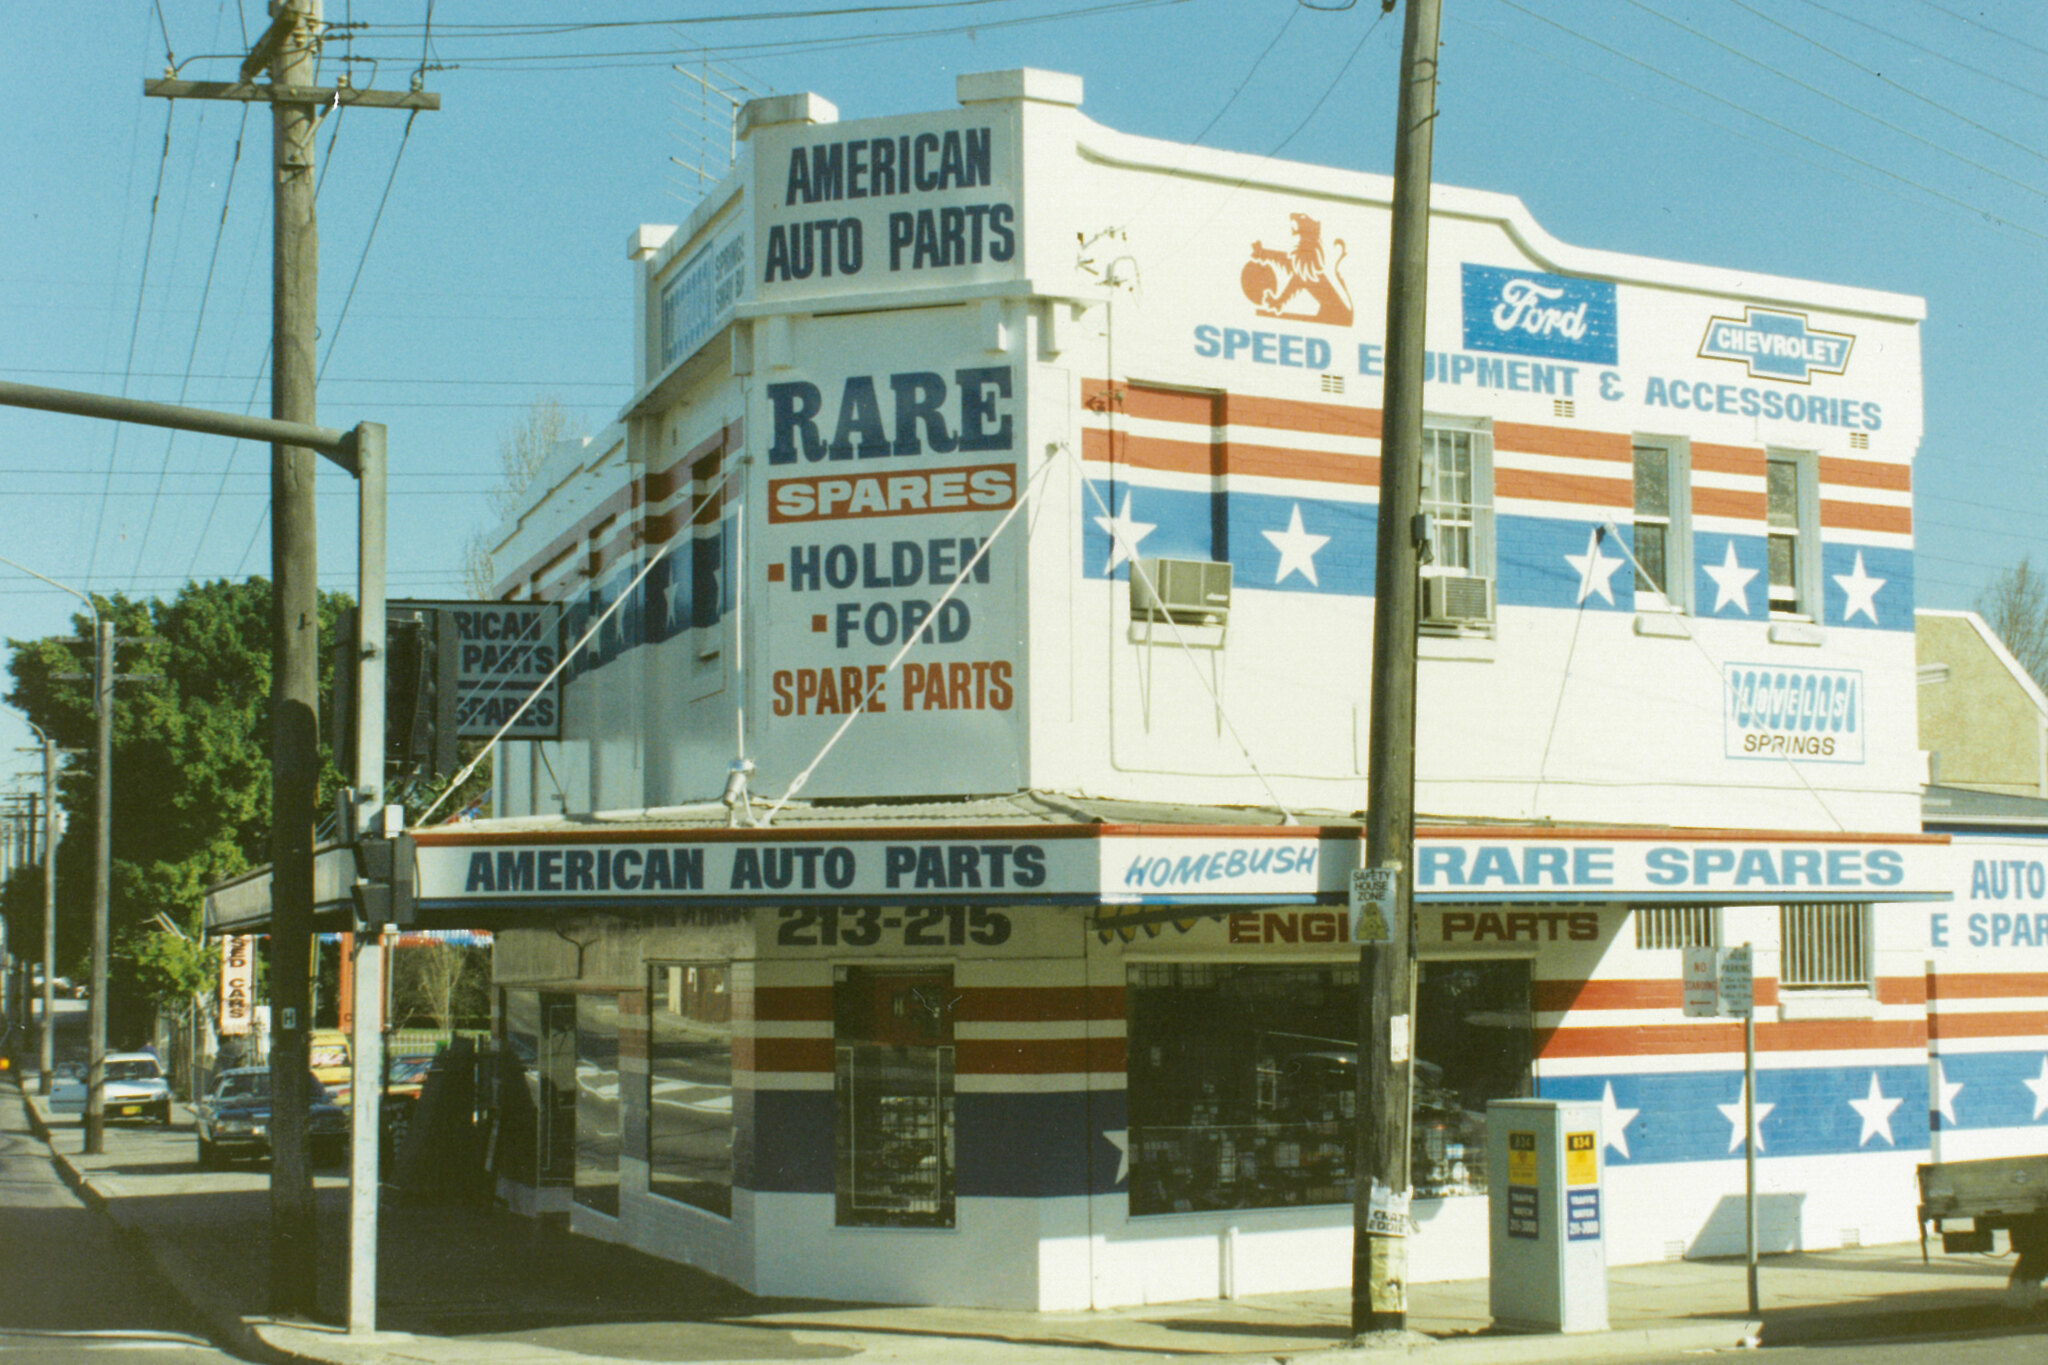 The 51 year history of Sydney’s American Auto Parts (AAP) store